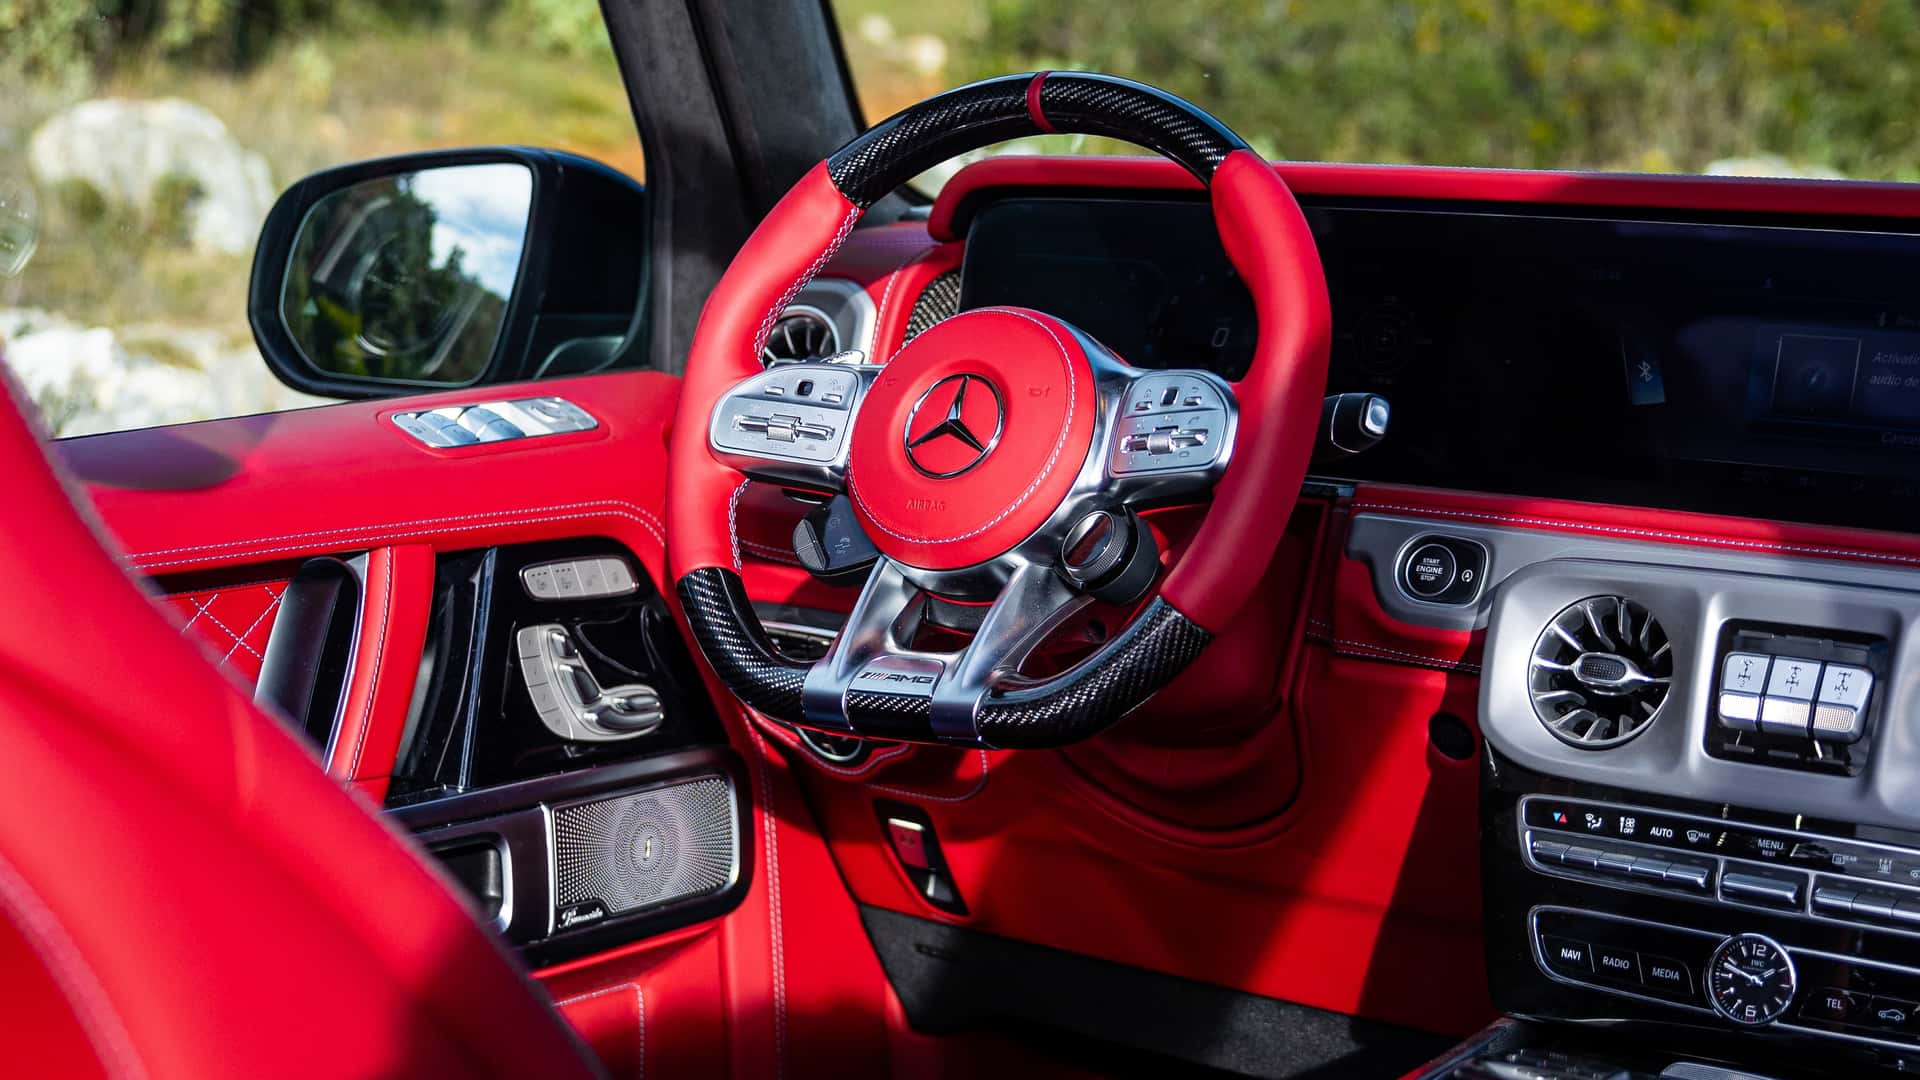 the-13-million-mercedes-benz-g-class-is-convertible-and-has-suicide-doors_11.jpg